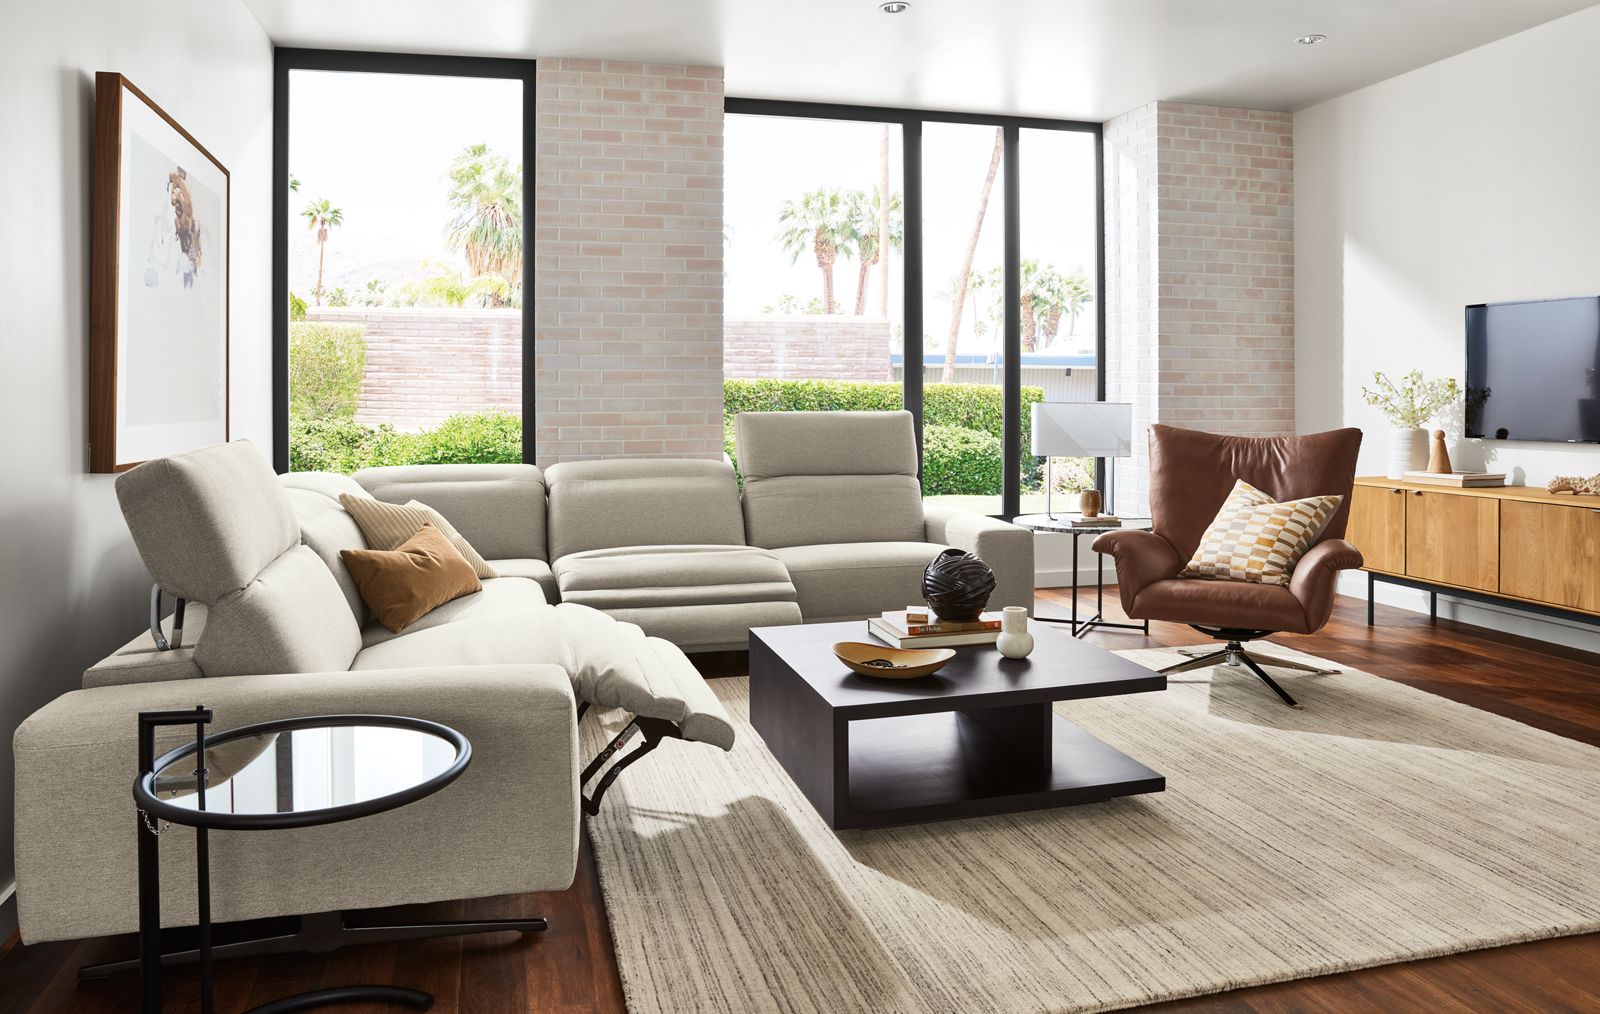 room setting with 5-piece gio power-reclining sectional, with two headrests up and two footrests up